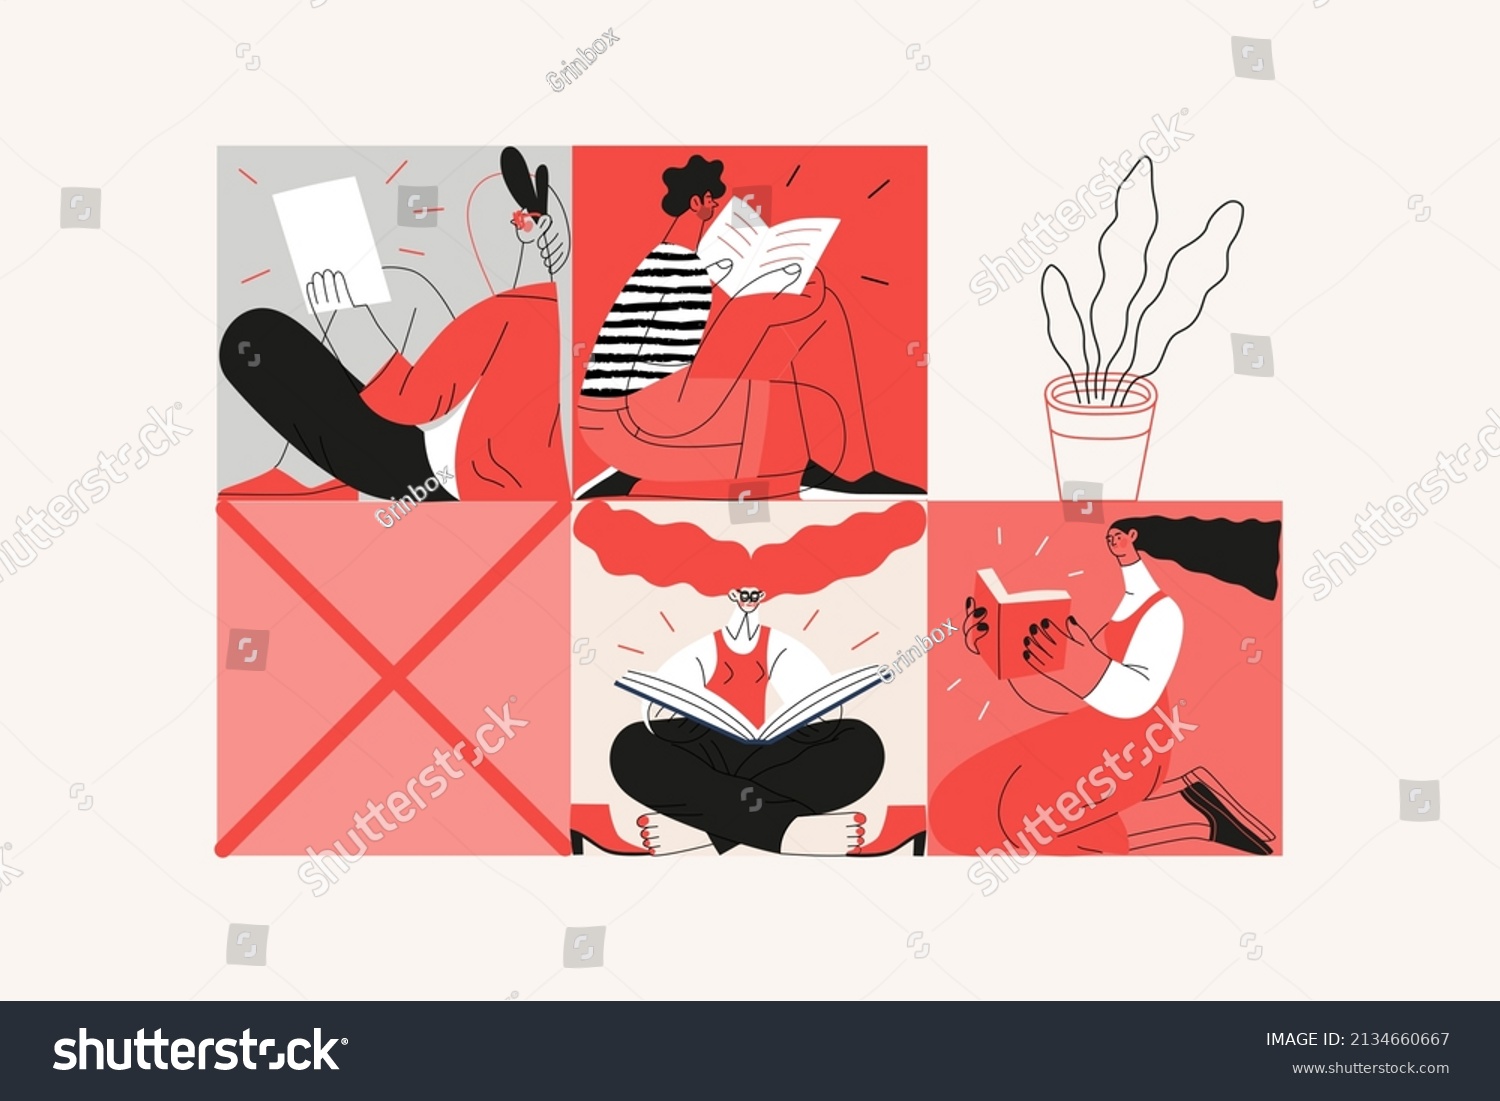 SVG of Startup illustration. Flat line vector modern concept illustration of young people, startup metaphor. Concept of building new business, planning, strategy, teamwork and management, company processes svg